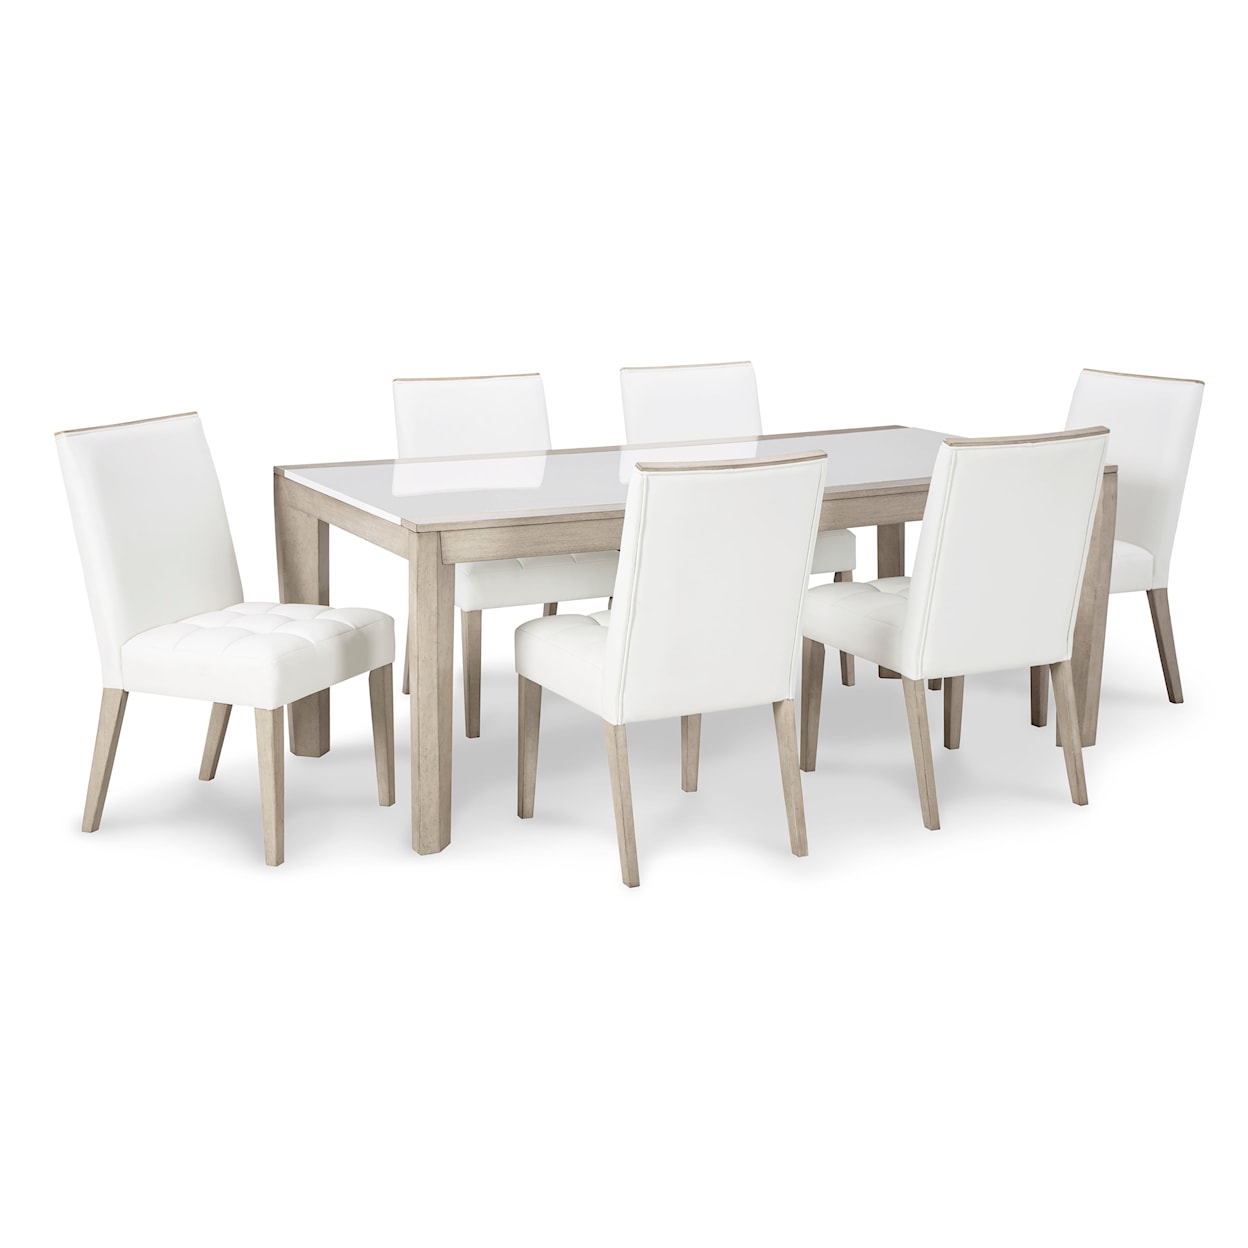 Signature Design by Ashley Wendora Table and 6 Chair Dining Set